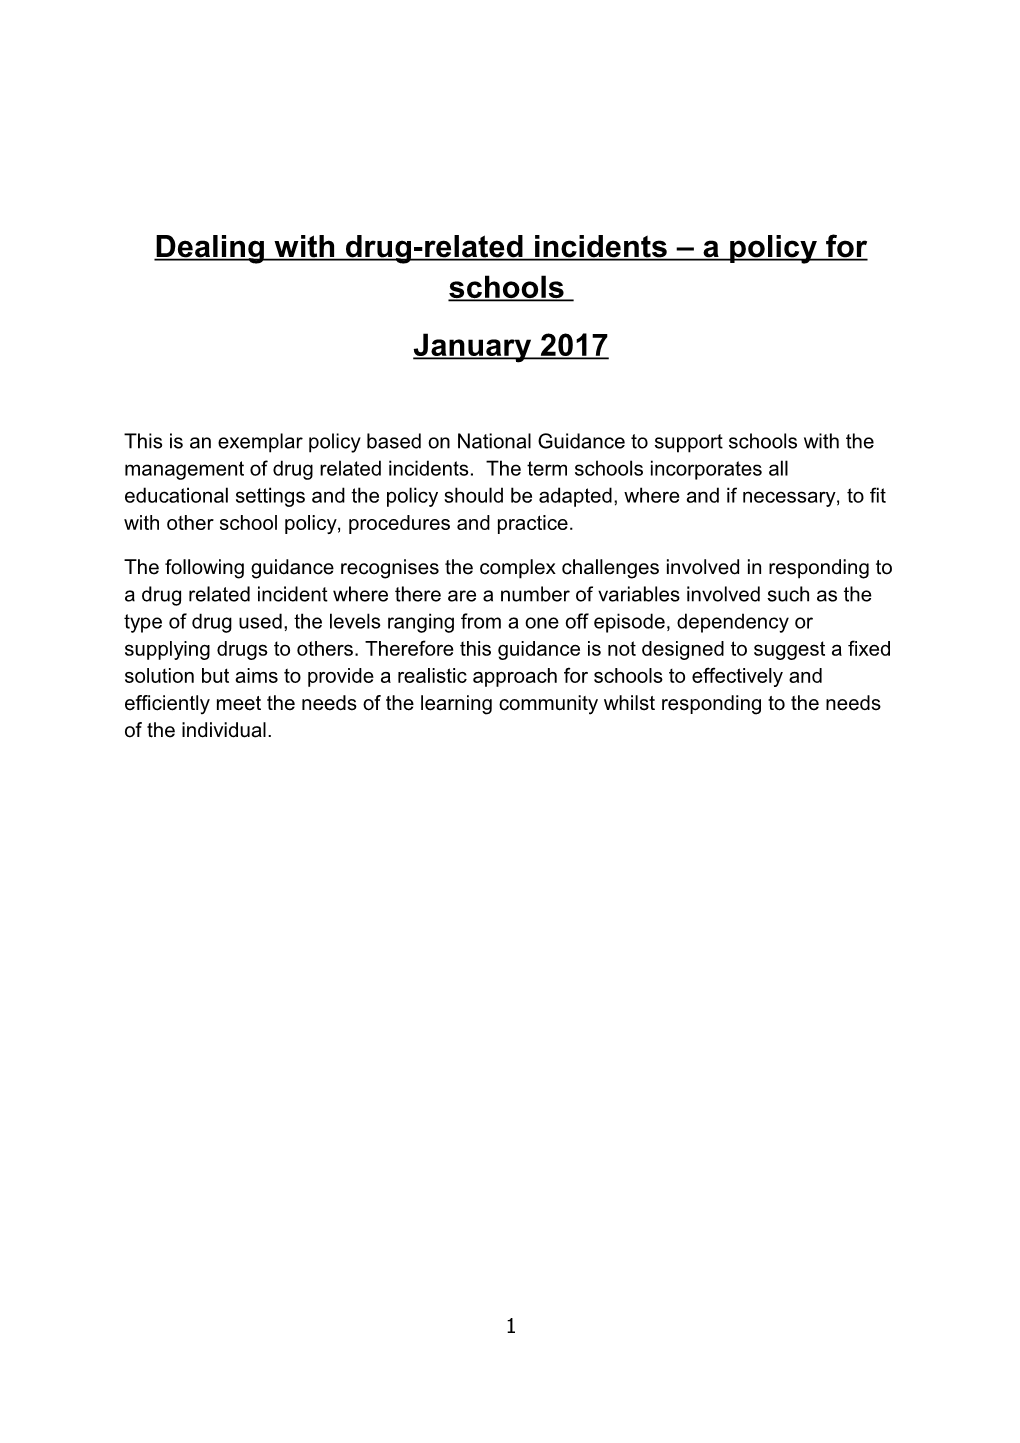 Dealing with Drug-Related Incidents a Policy for Schools